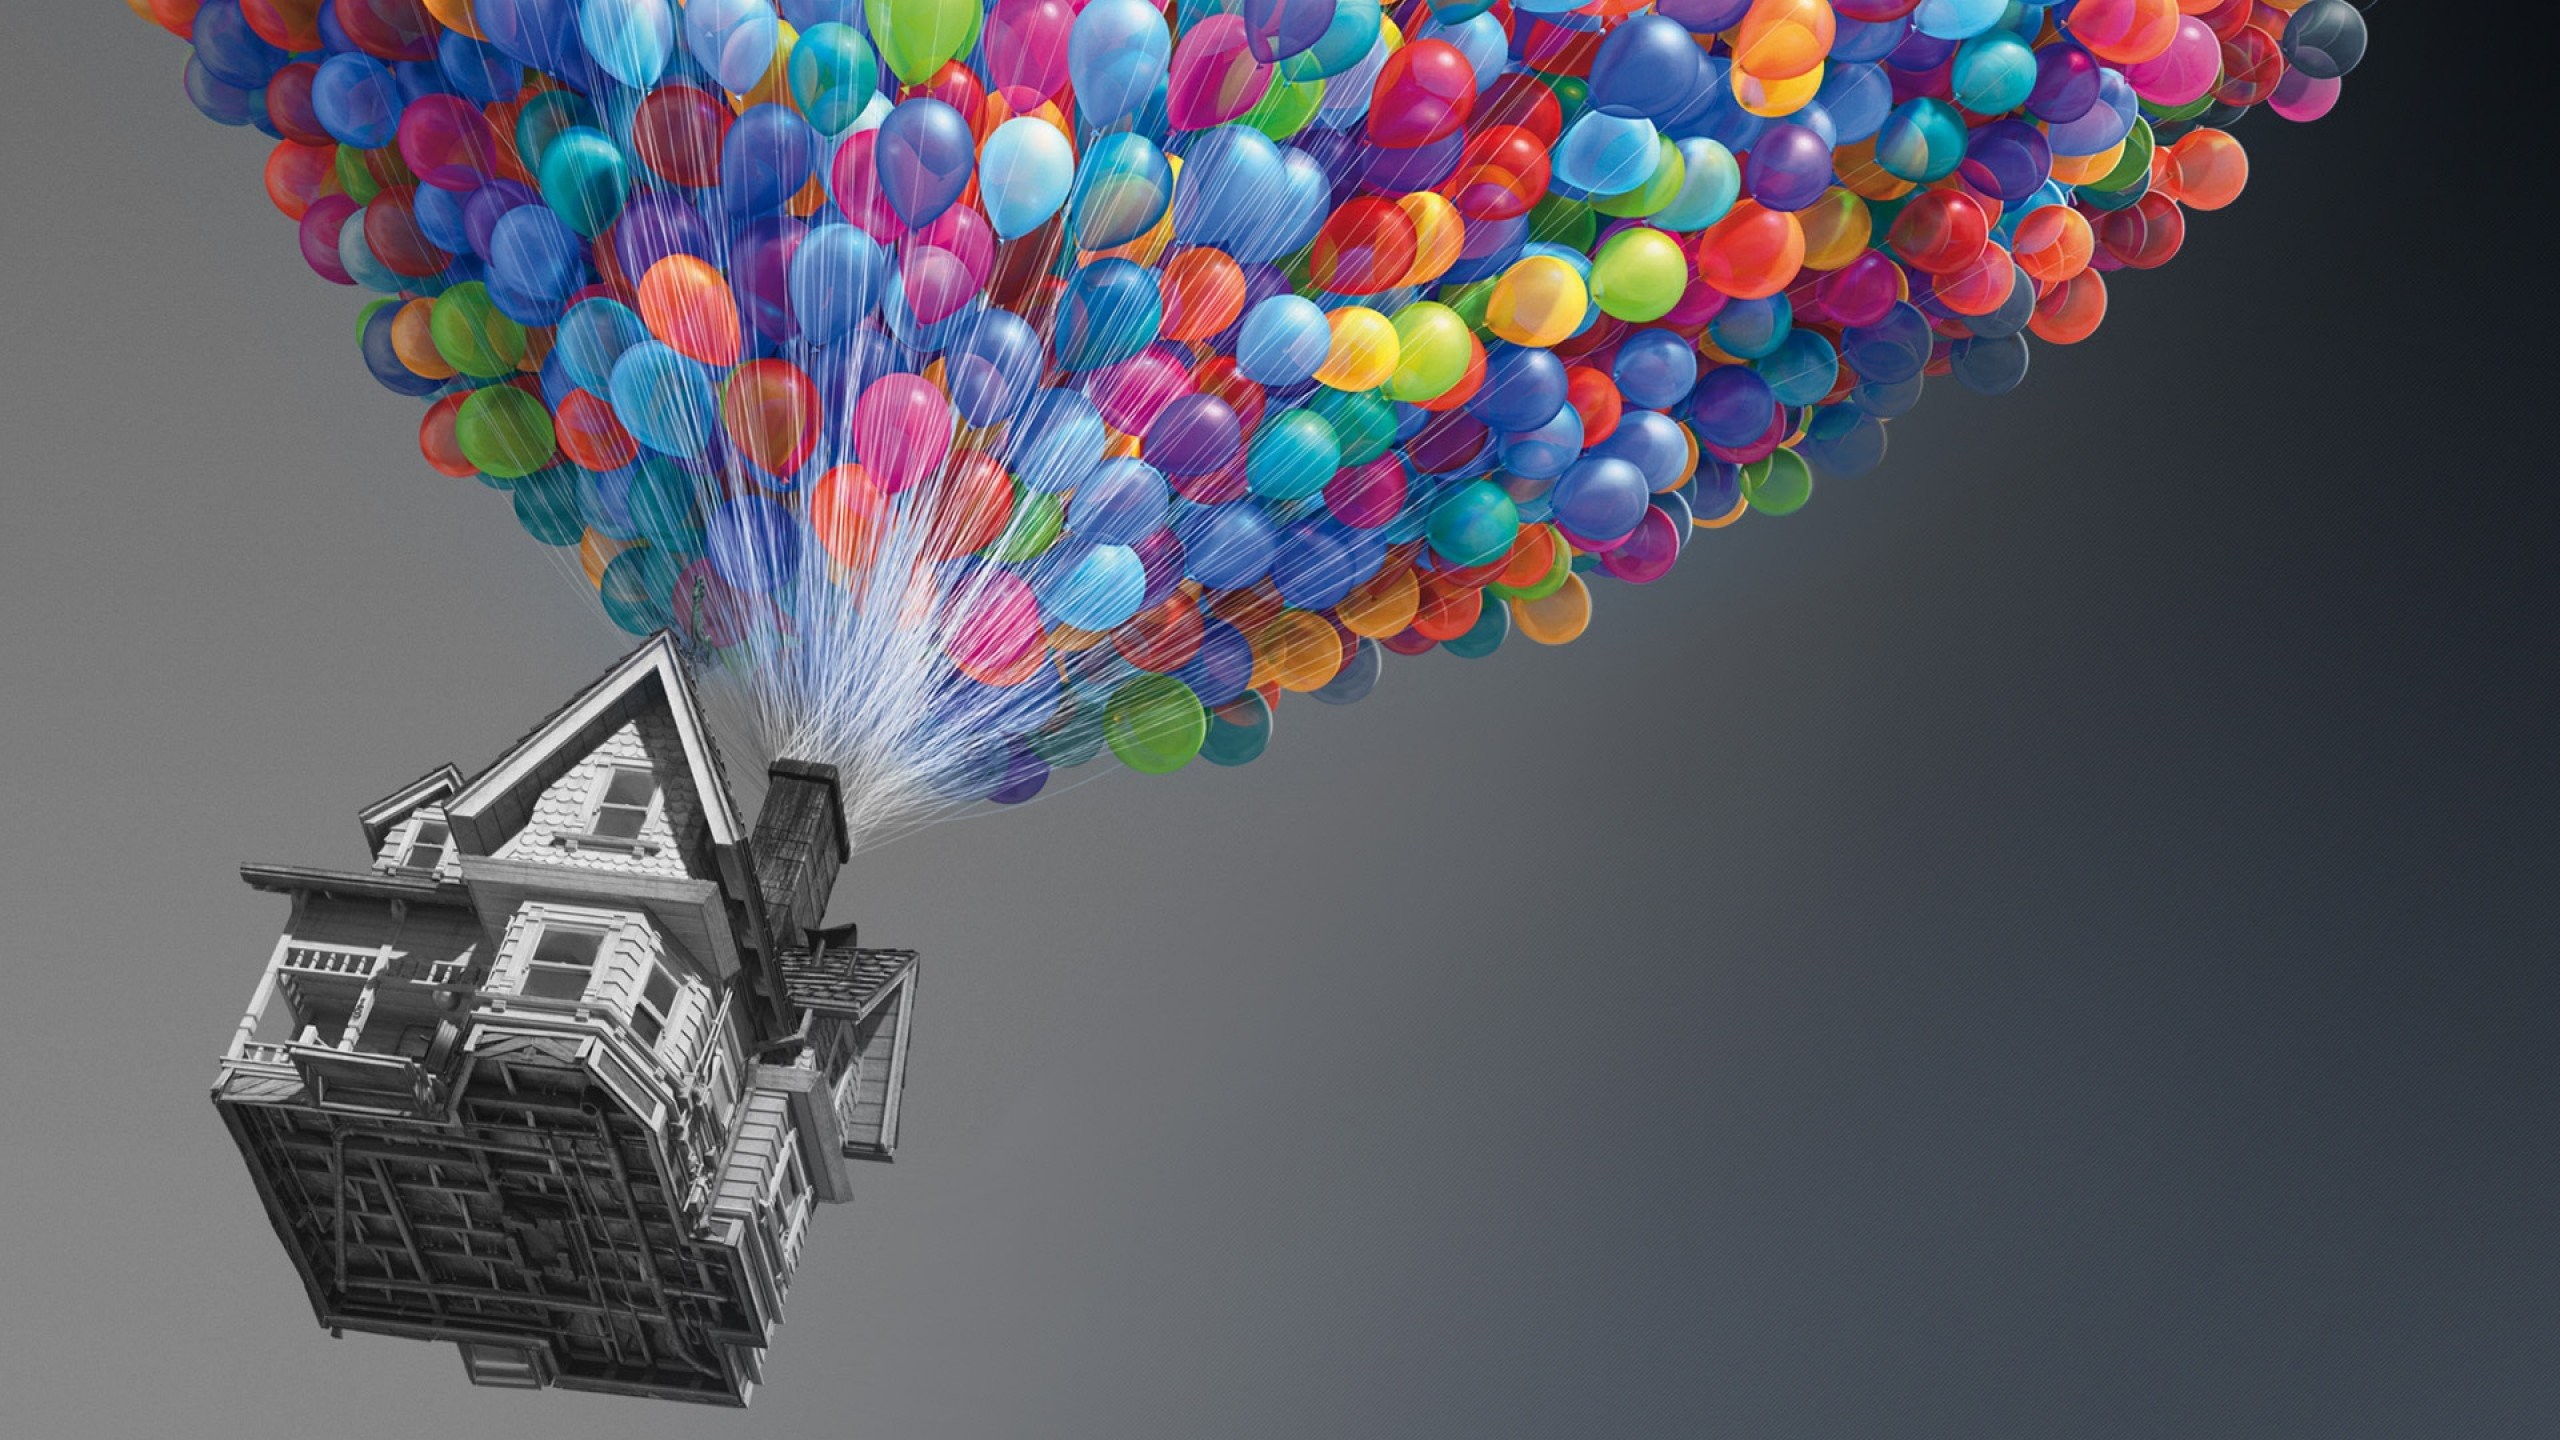 2560x1440 Balloons Flying Houses Movies Selective Colors free iPhone or Android Full  HD wallpaper.